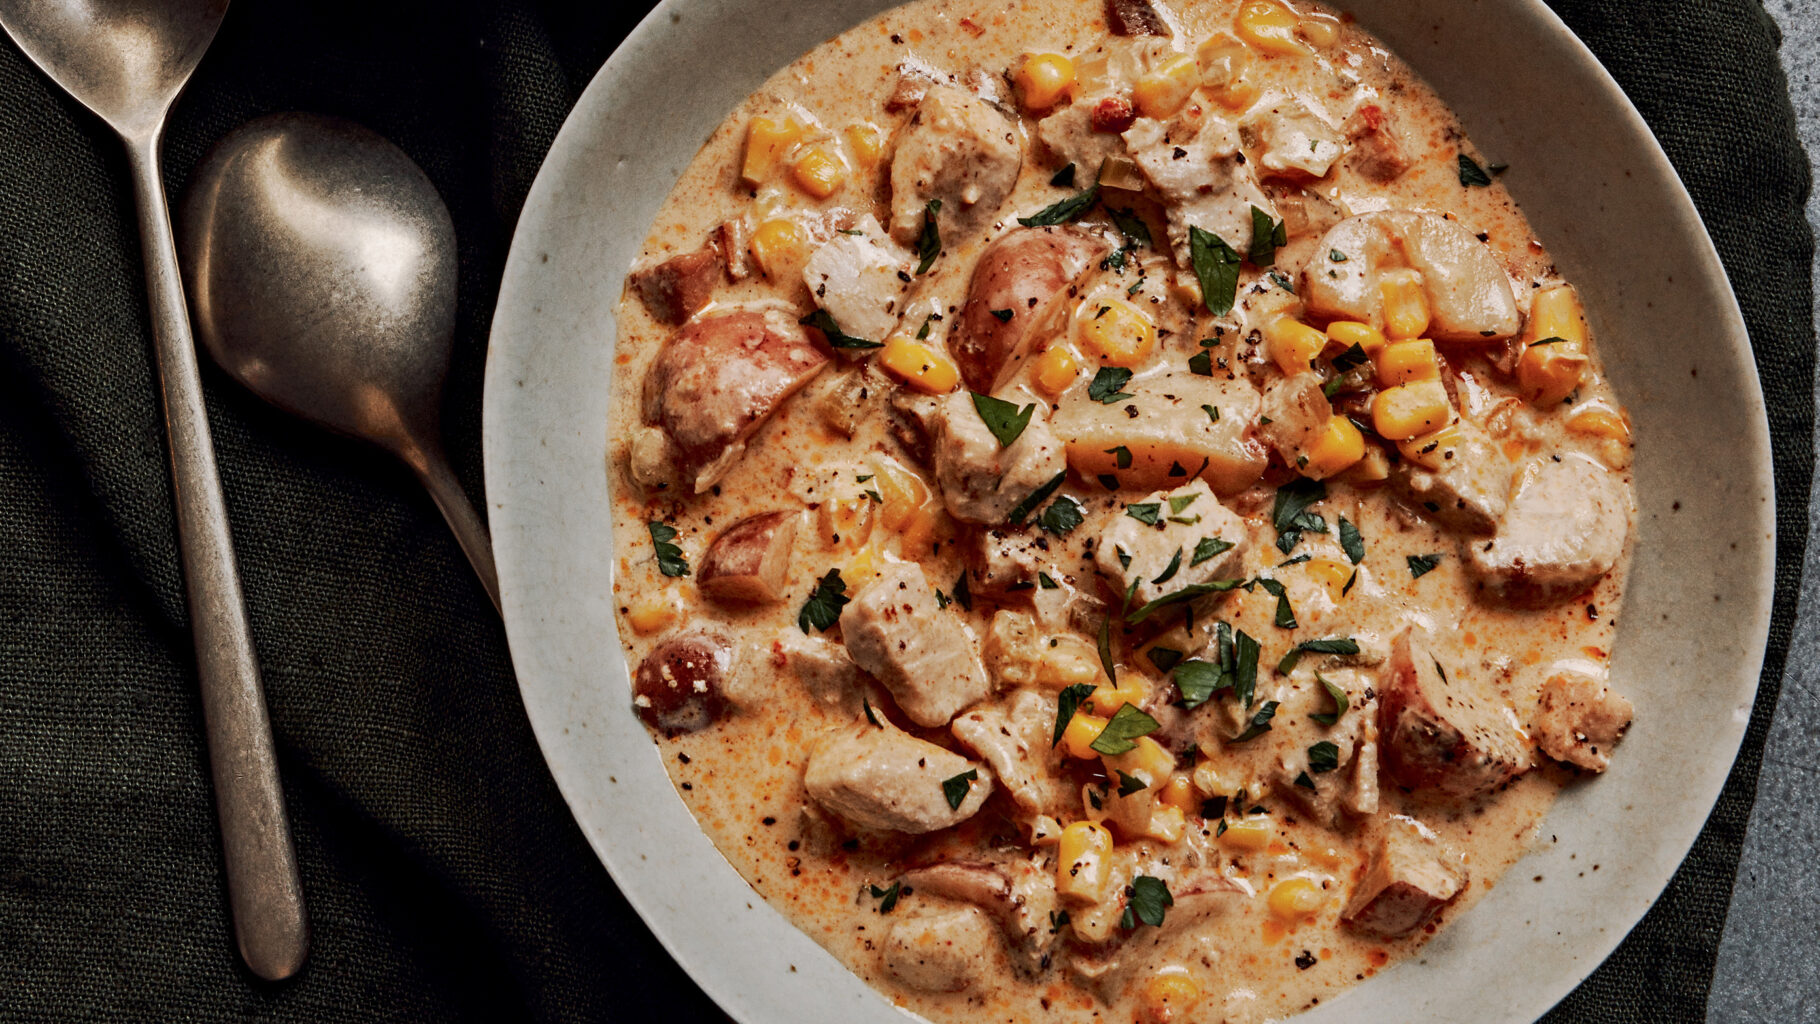 Corn Chowder recipe excerpted from Good Catch by Valentine Thomas. Photo by Andrew Thomas Lee